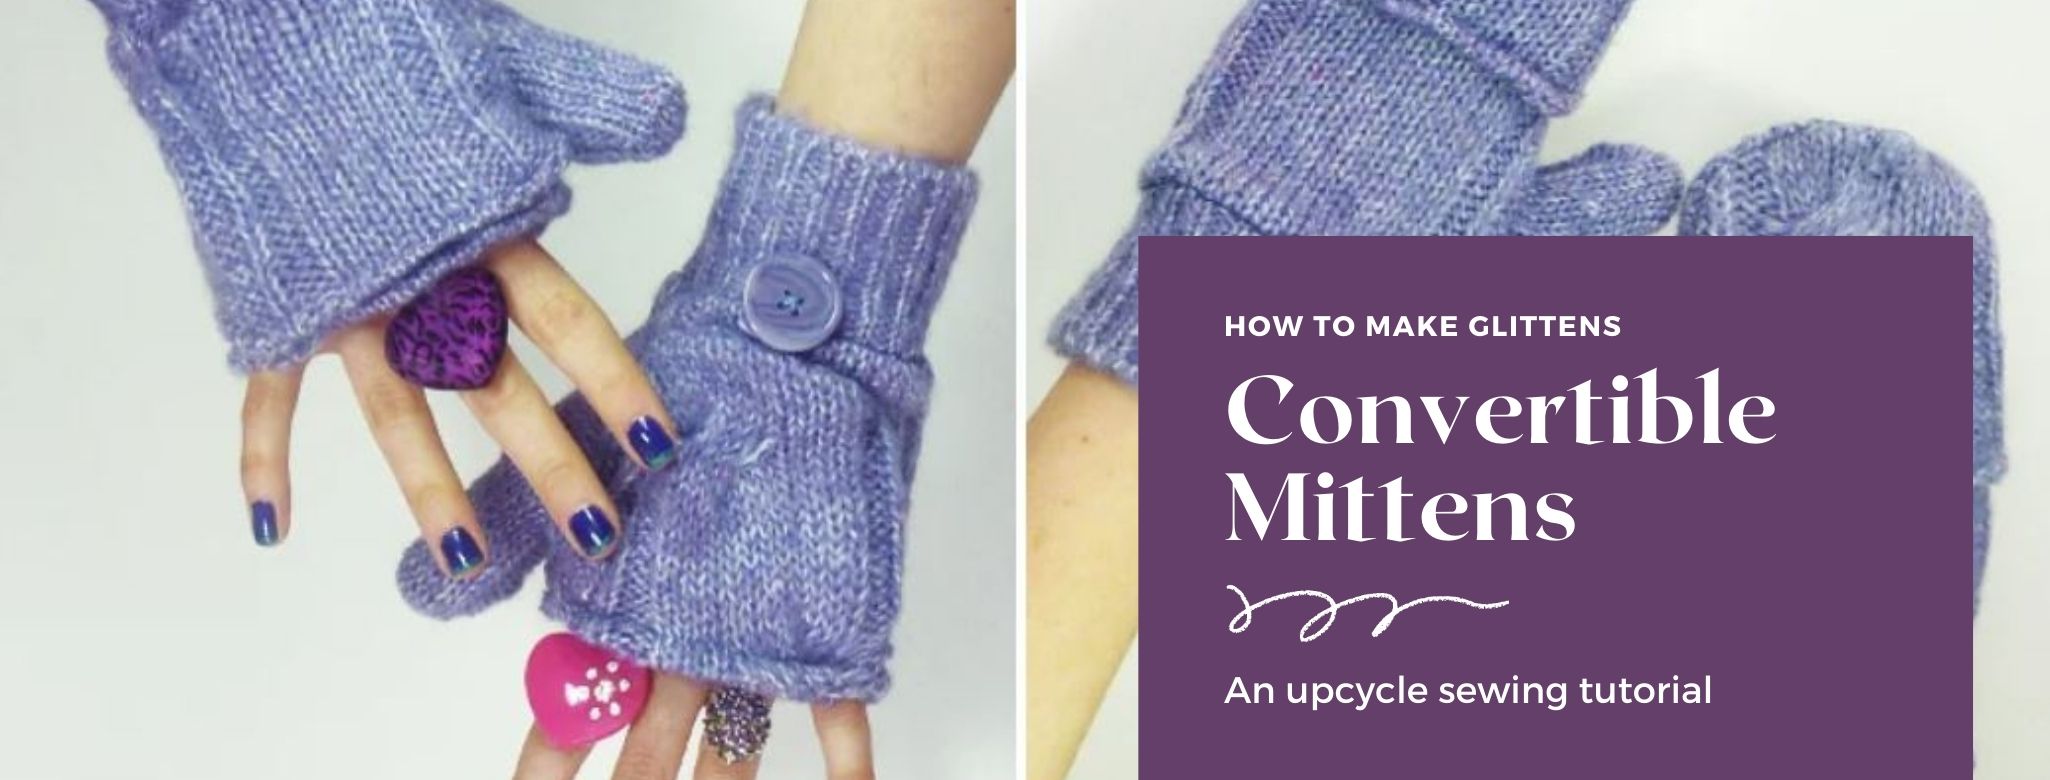 How to Make Convertible Mittens: An Upcycle Sewing Tutorial